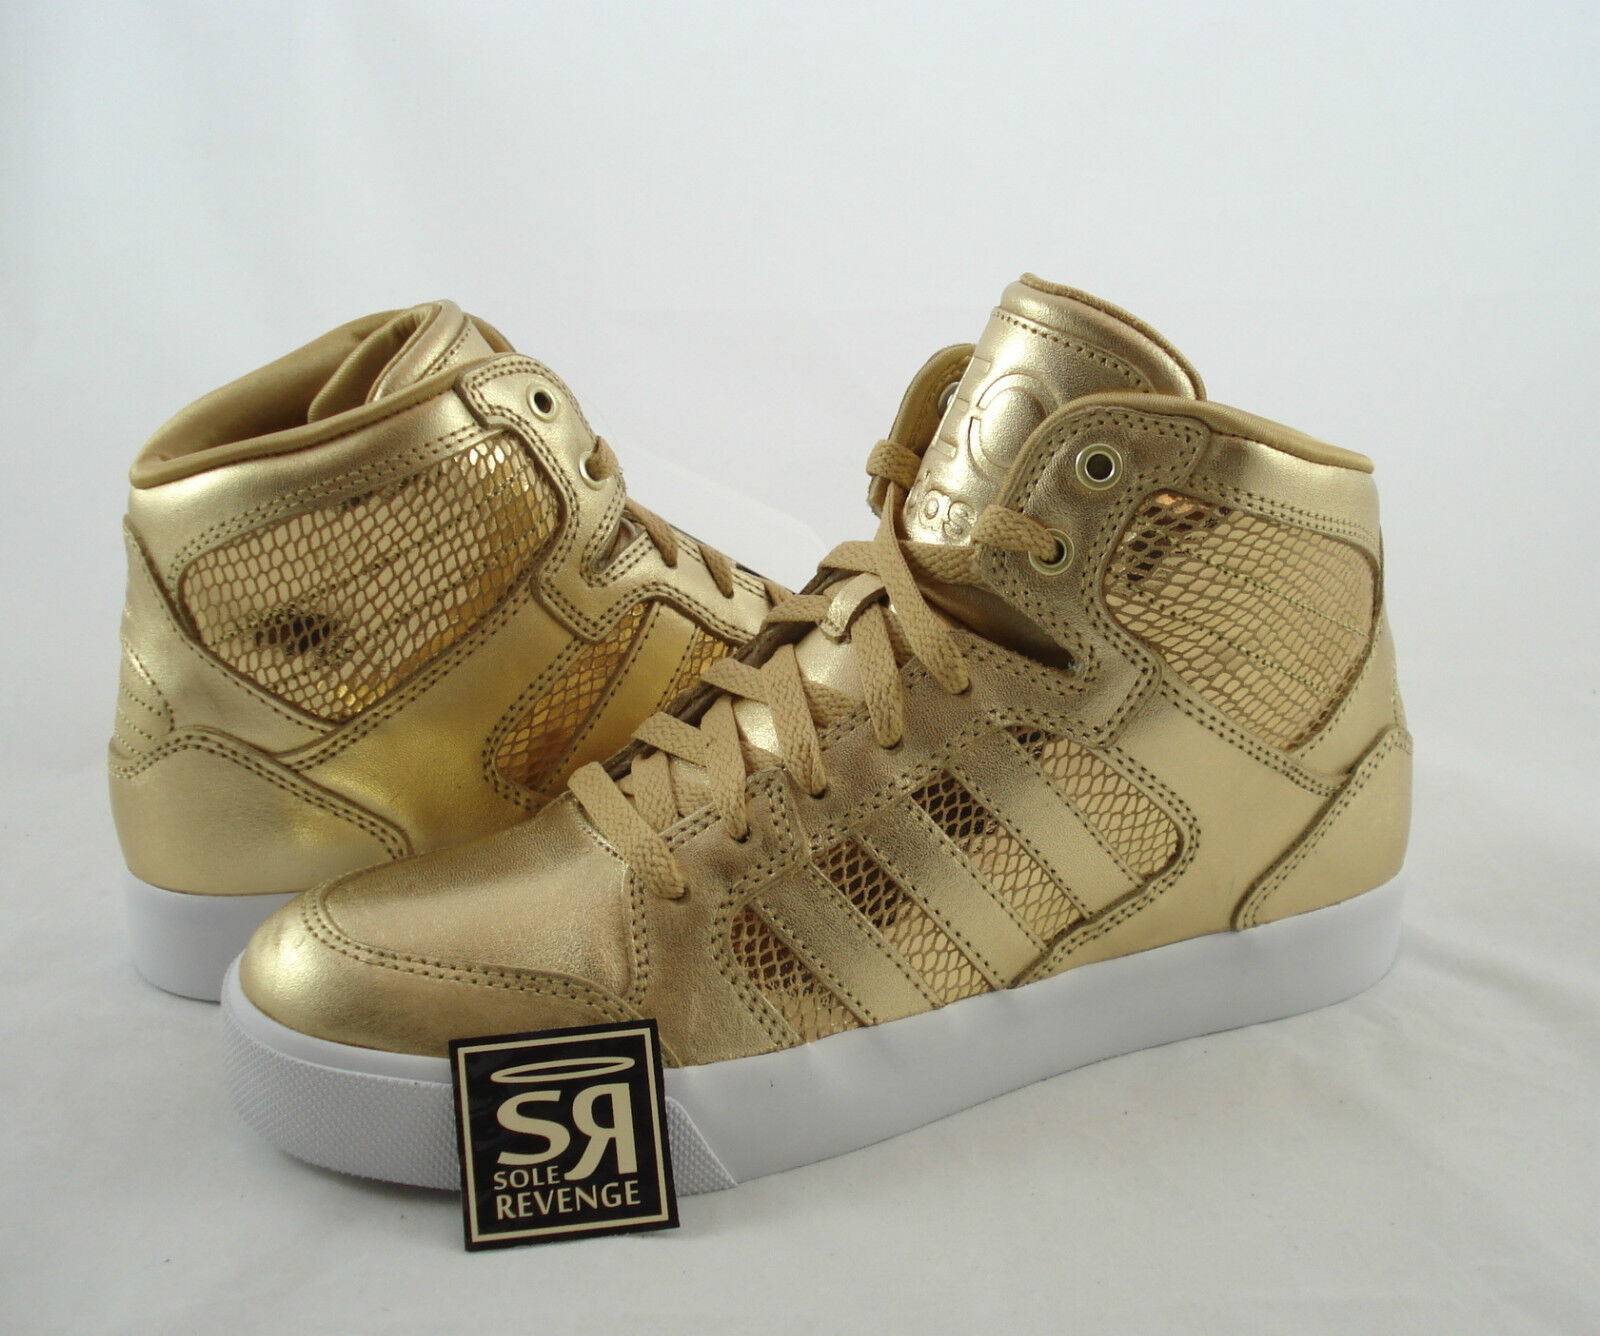 adidas neo gold sneakers